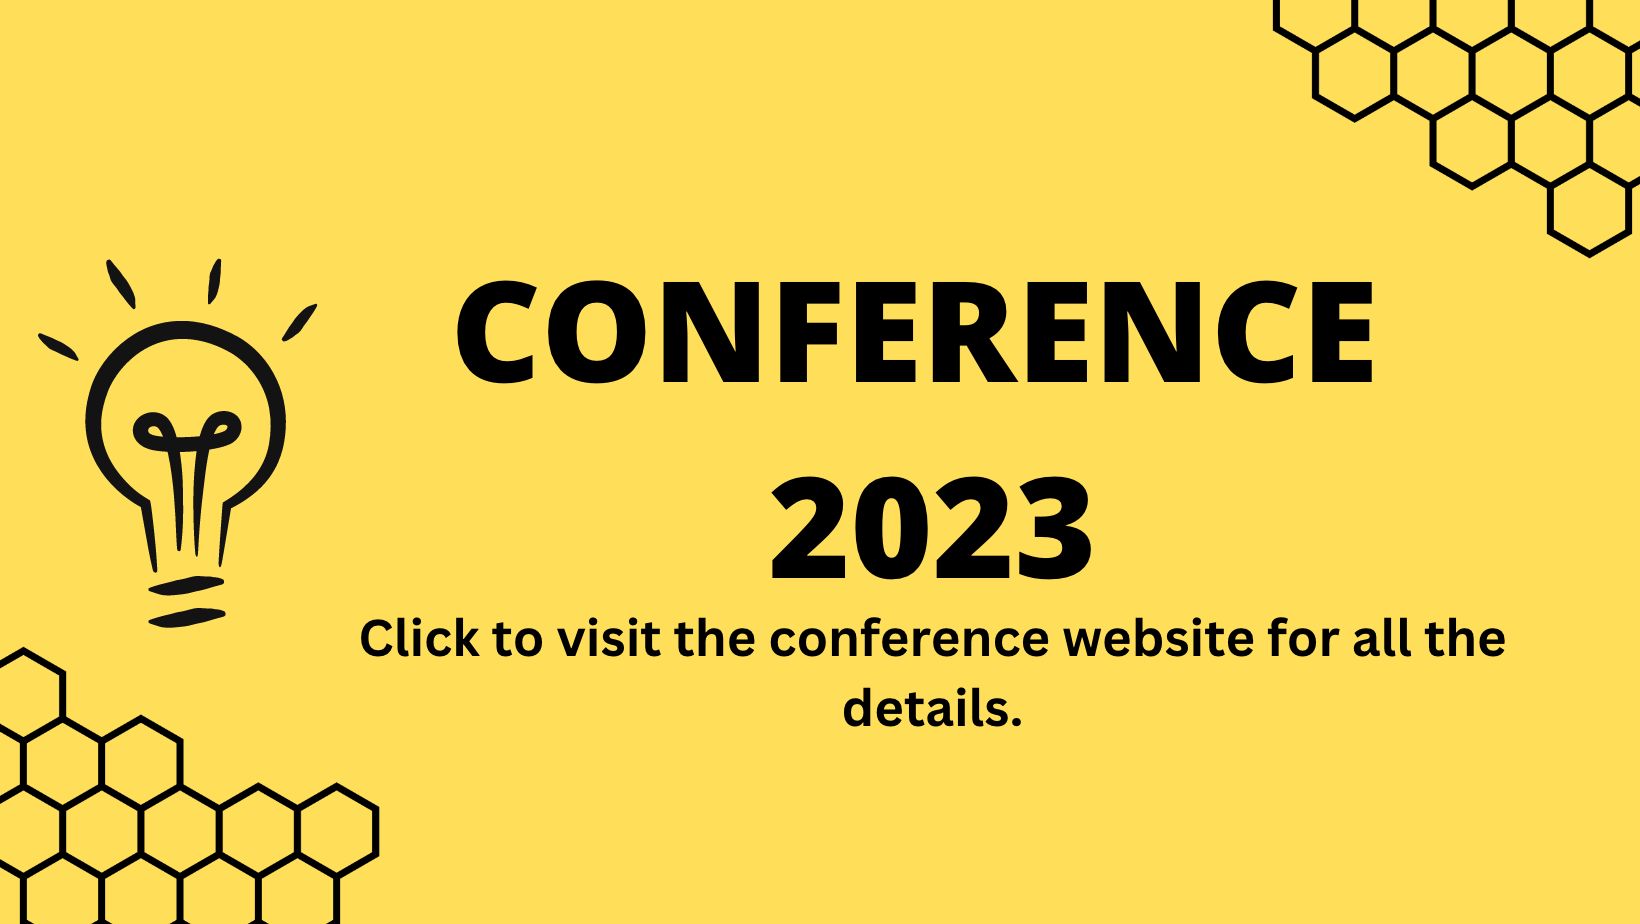 Click on the image to visit the MASL Conference Website